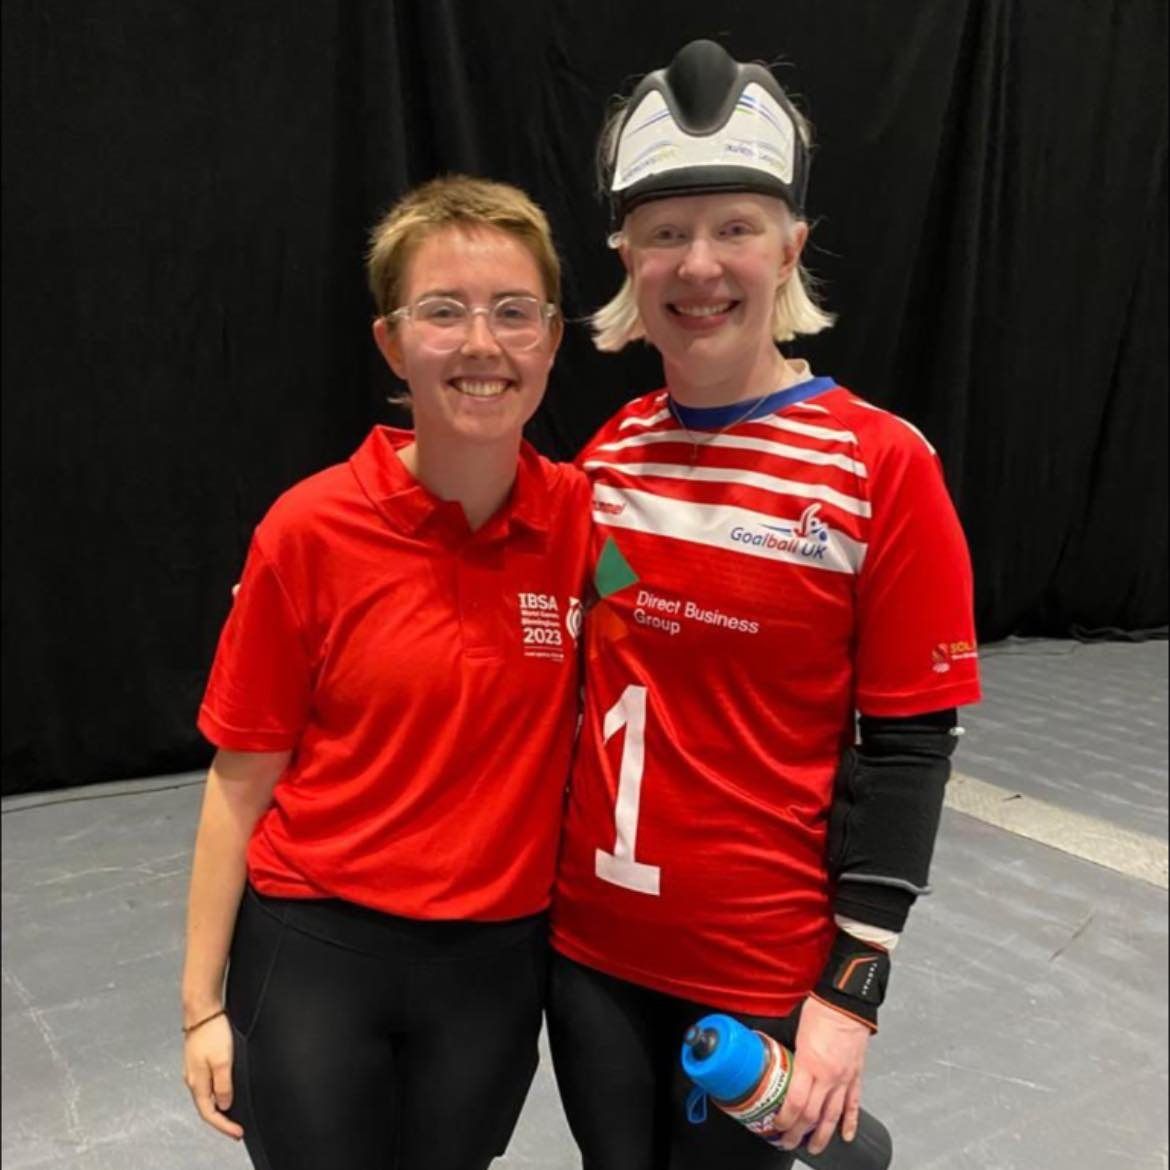 Maggie with short hair and a hearing aid smiles next to an international goalball player